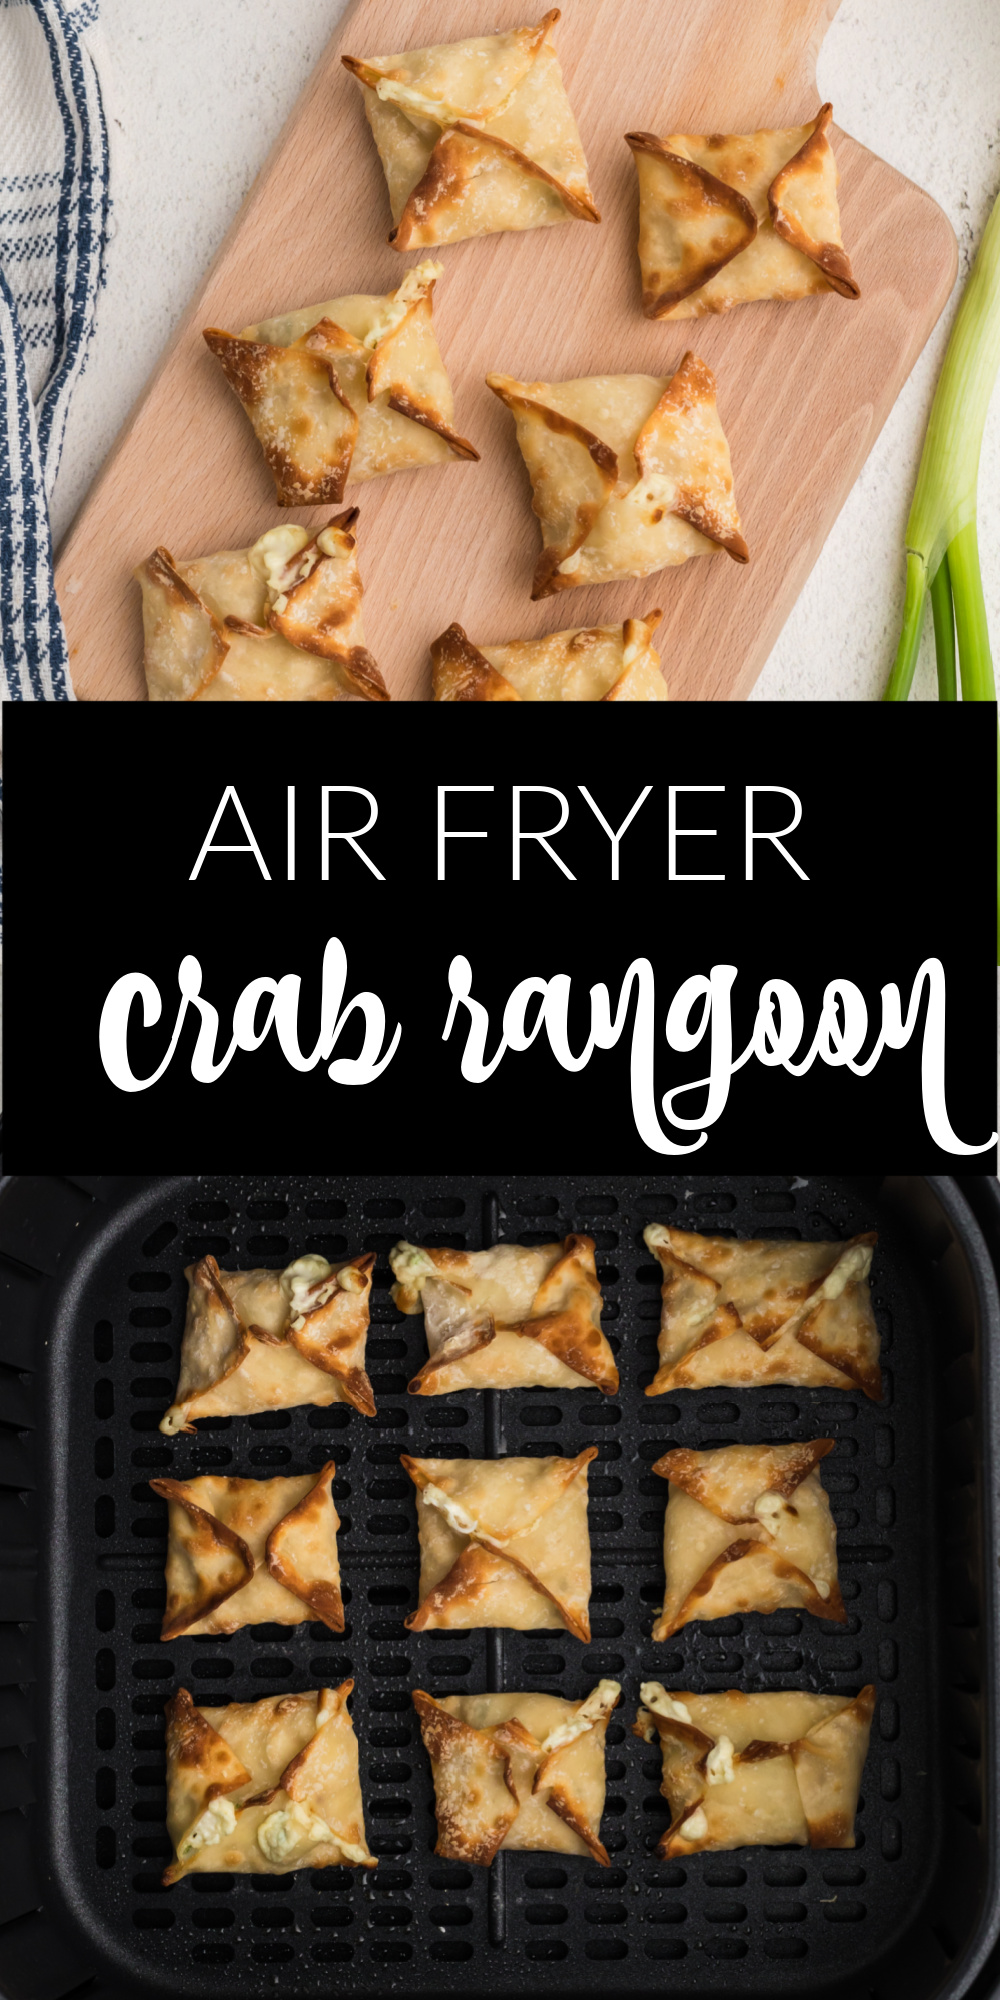 Creamy and delicious, these homemade air fryer crab rangoons have a rich, silky, cream cheese center full of lump crab meat and are seasoned with green onions, garlic, salt, and pepper. The crab filling is then encased in a wonton wrap that is air fried to a crisp golden brown with just the right amount of crunch. Perfect as an appetizer or as a dinner, these crab rangoons are so good they rival even the best Chinese restaurants!